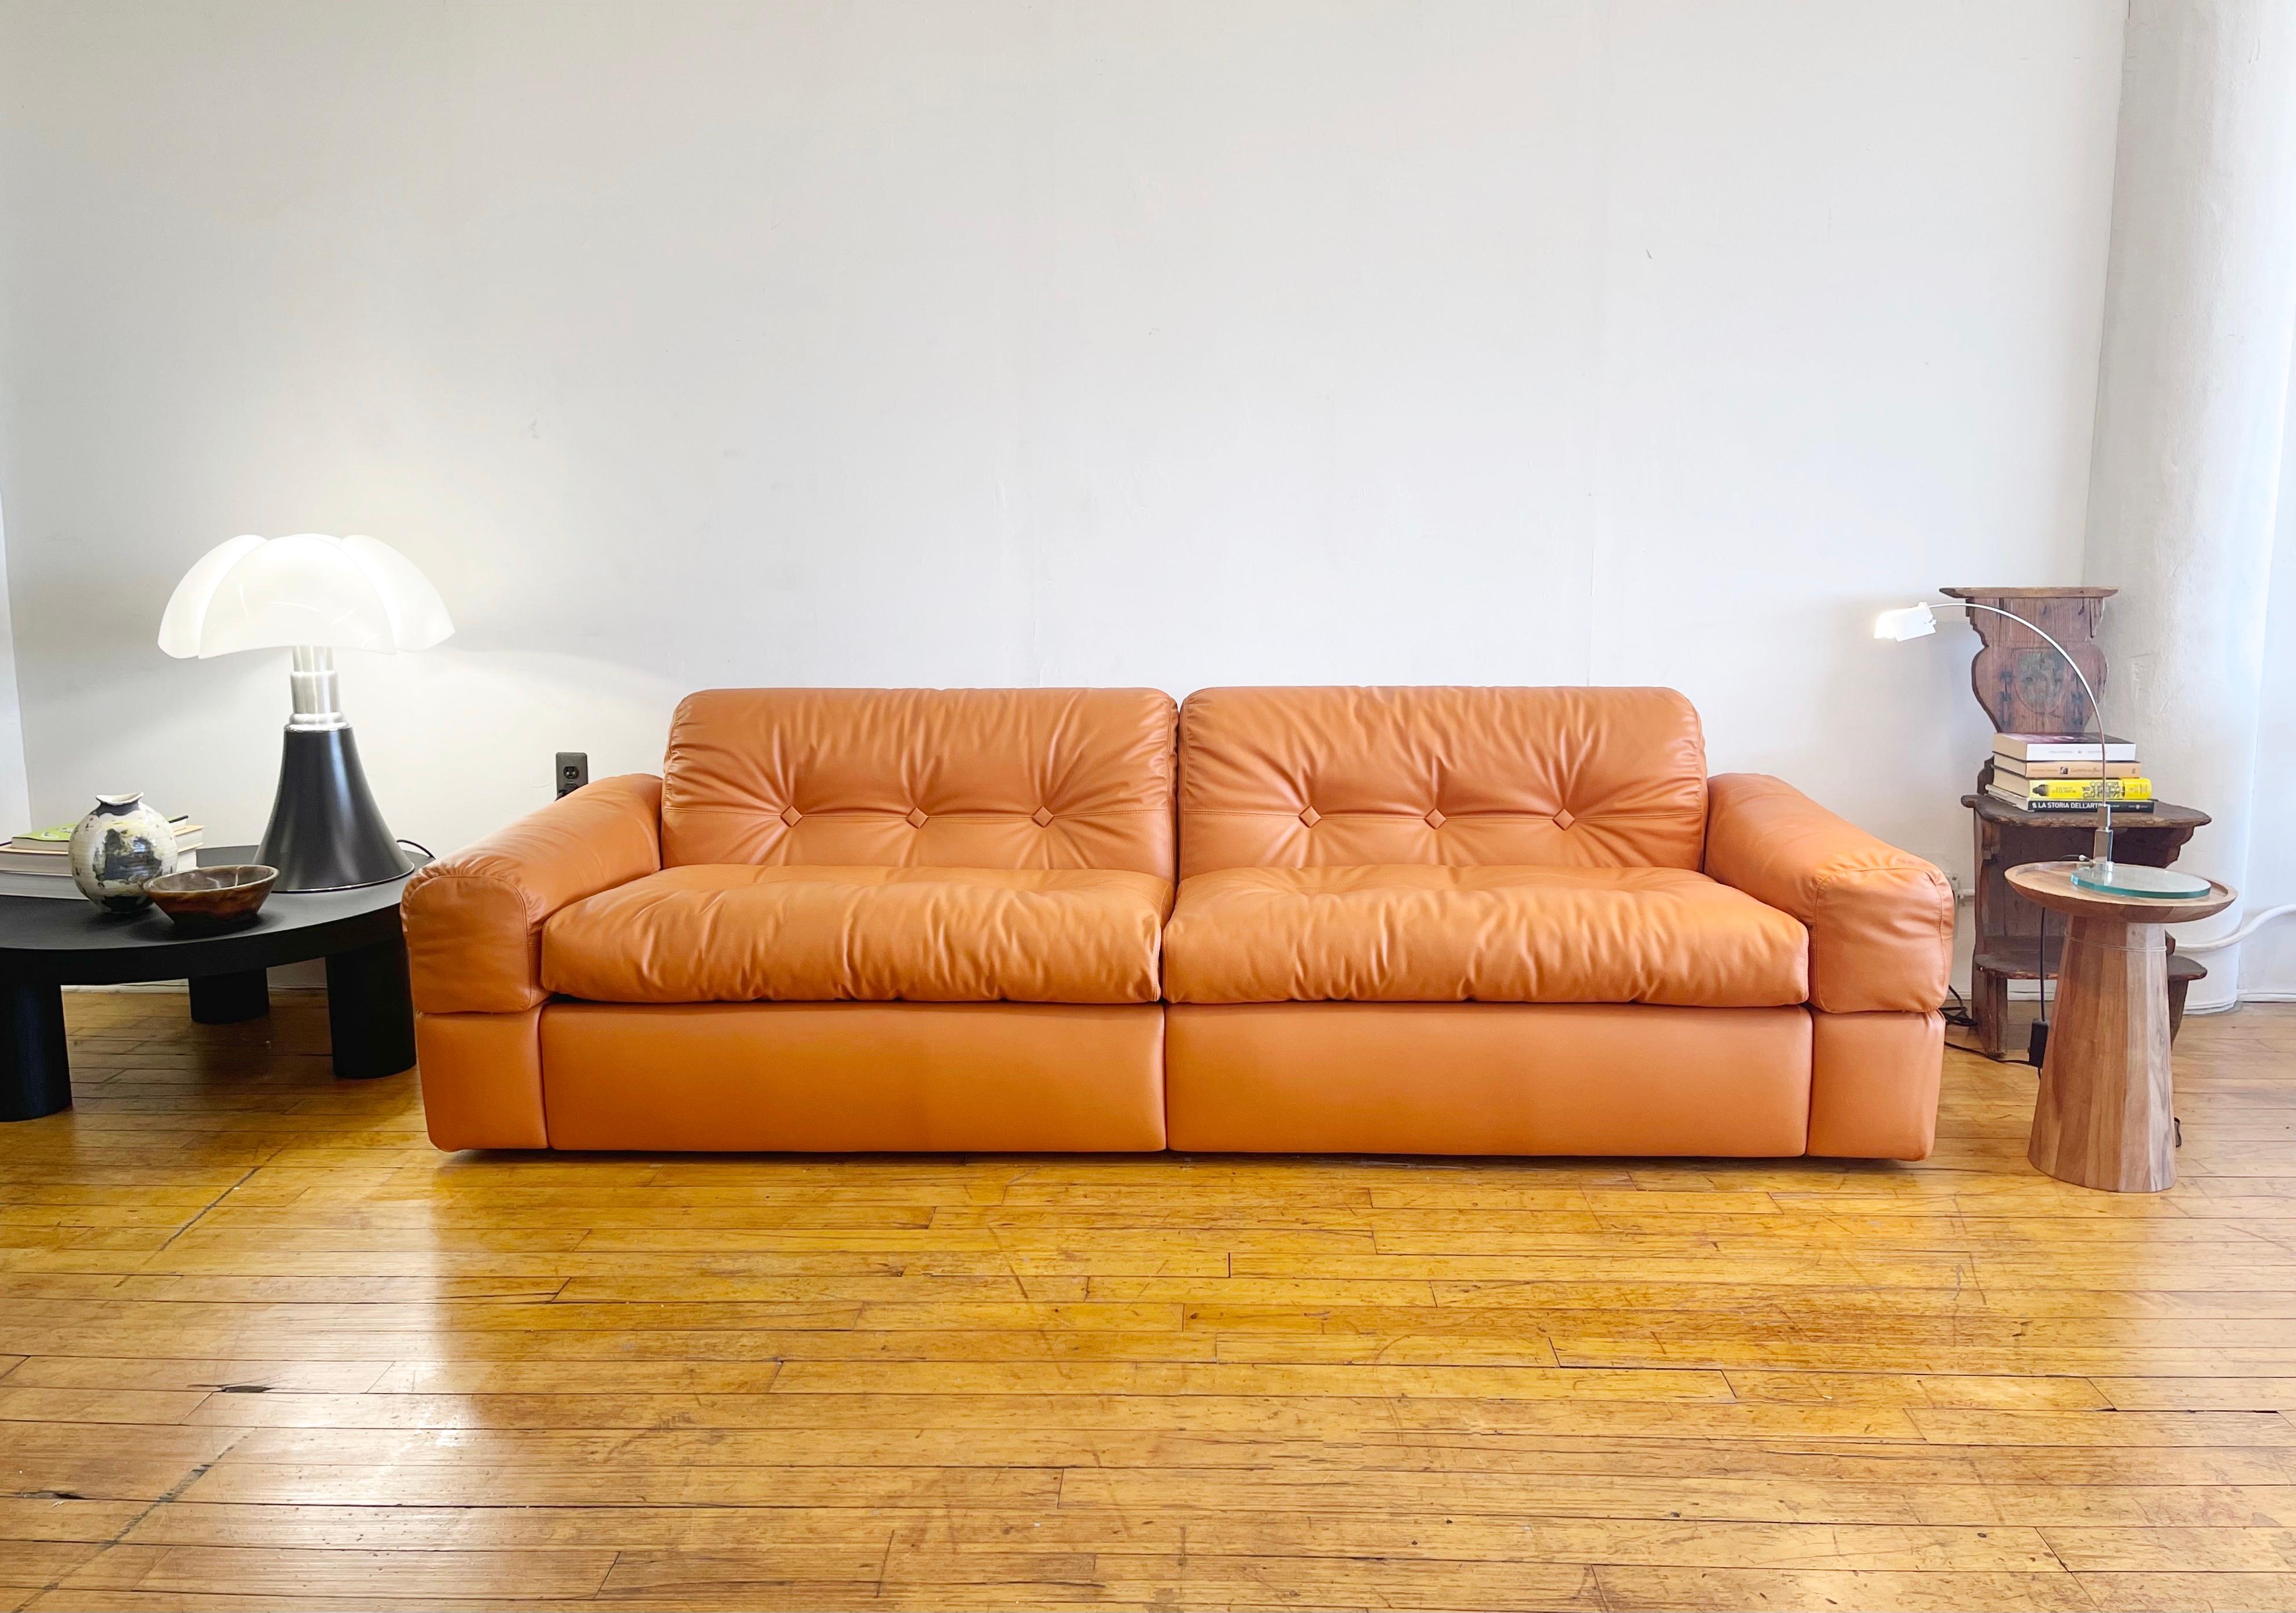 Adriano Piazzesi 1970s Sofa Newly Upholstered with Copper Brown Italian Leather In Good Condition For Sale In Jersey City, NJ